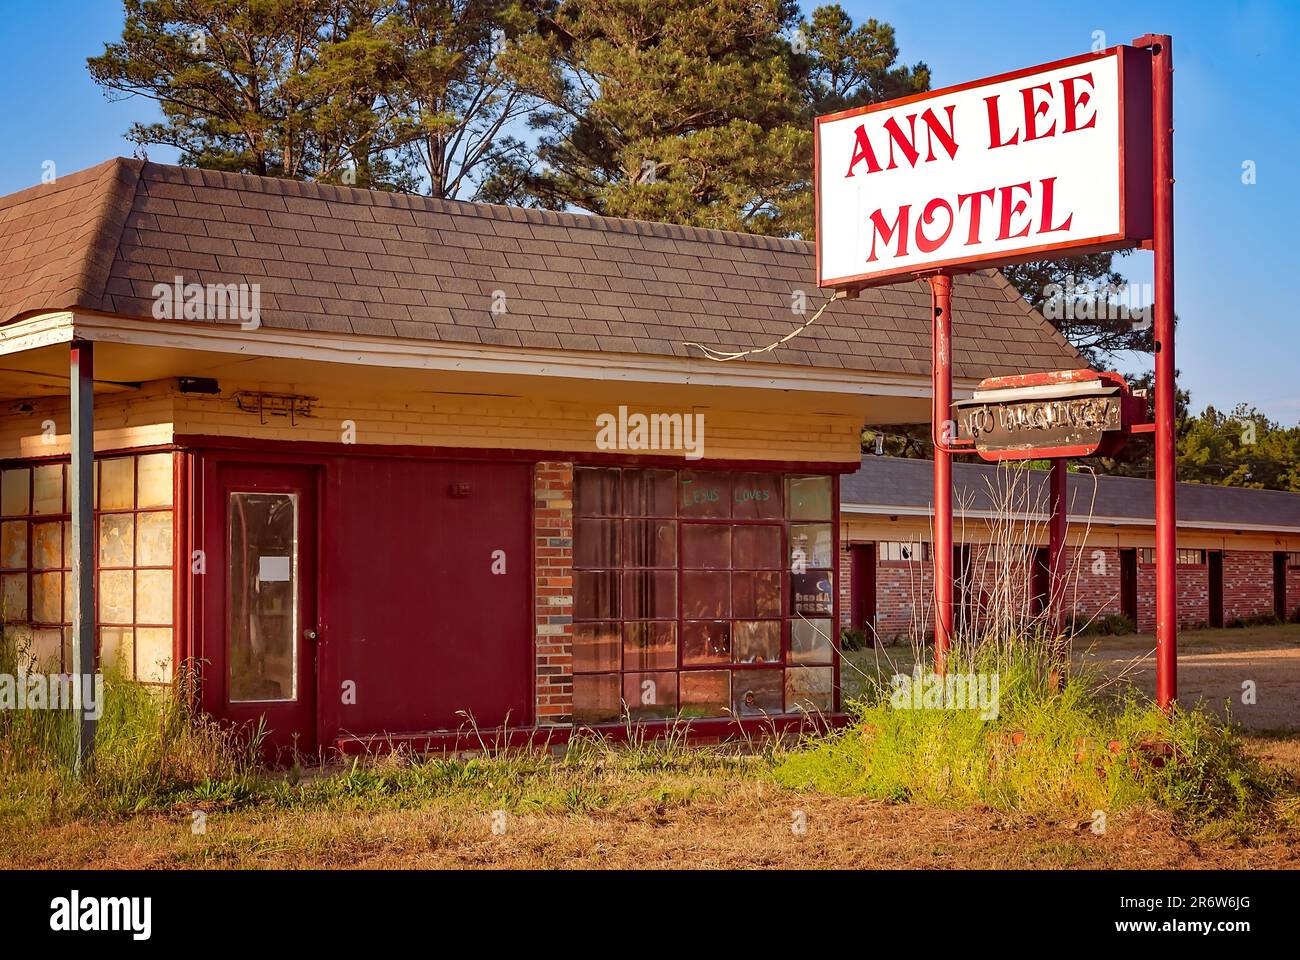 Ann Lee Motel sits abandoned along Highway 183 East, April 21, 2010, in Columbus, Mississippi. The budget motel was demolished in 2019. Stock Photo